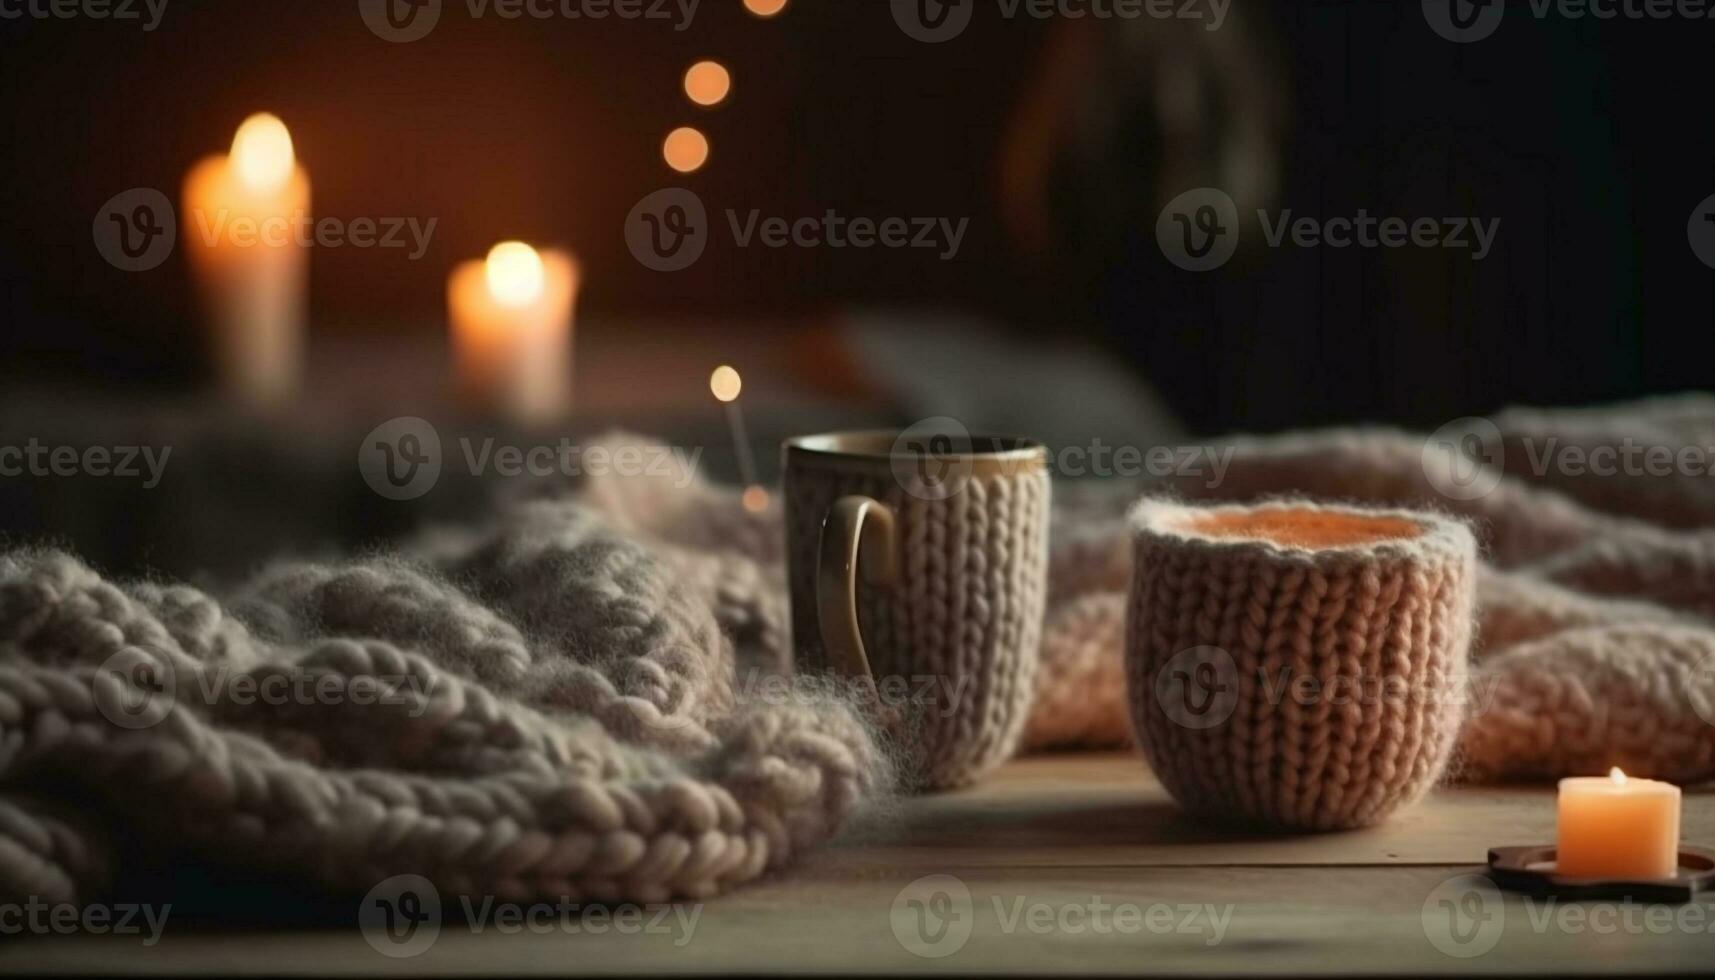 The cozy winter night was illuminated by candlelight and lanterns generated by AI photo